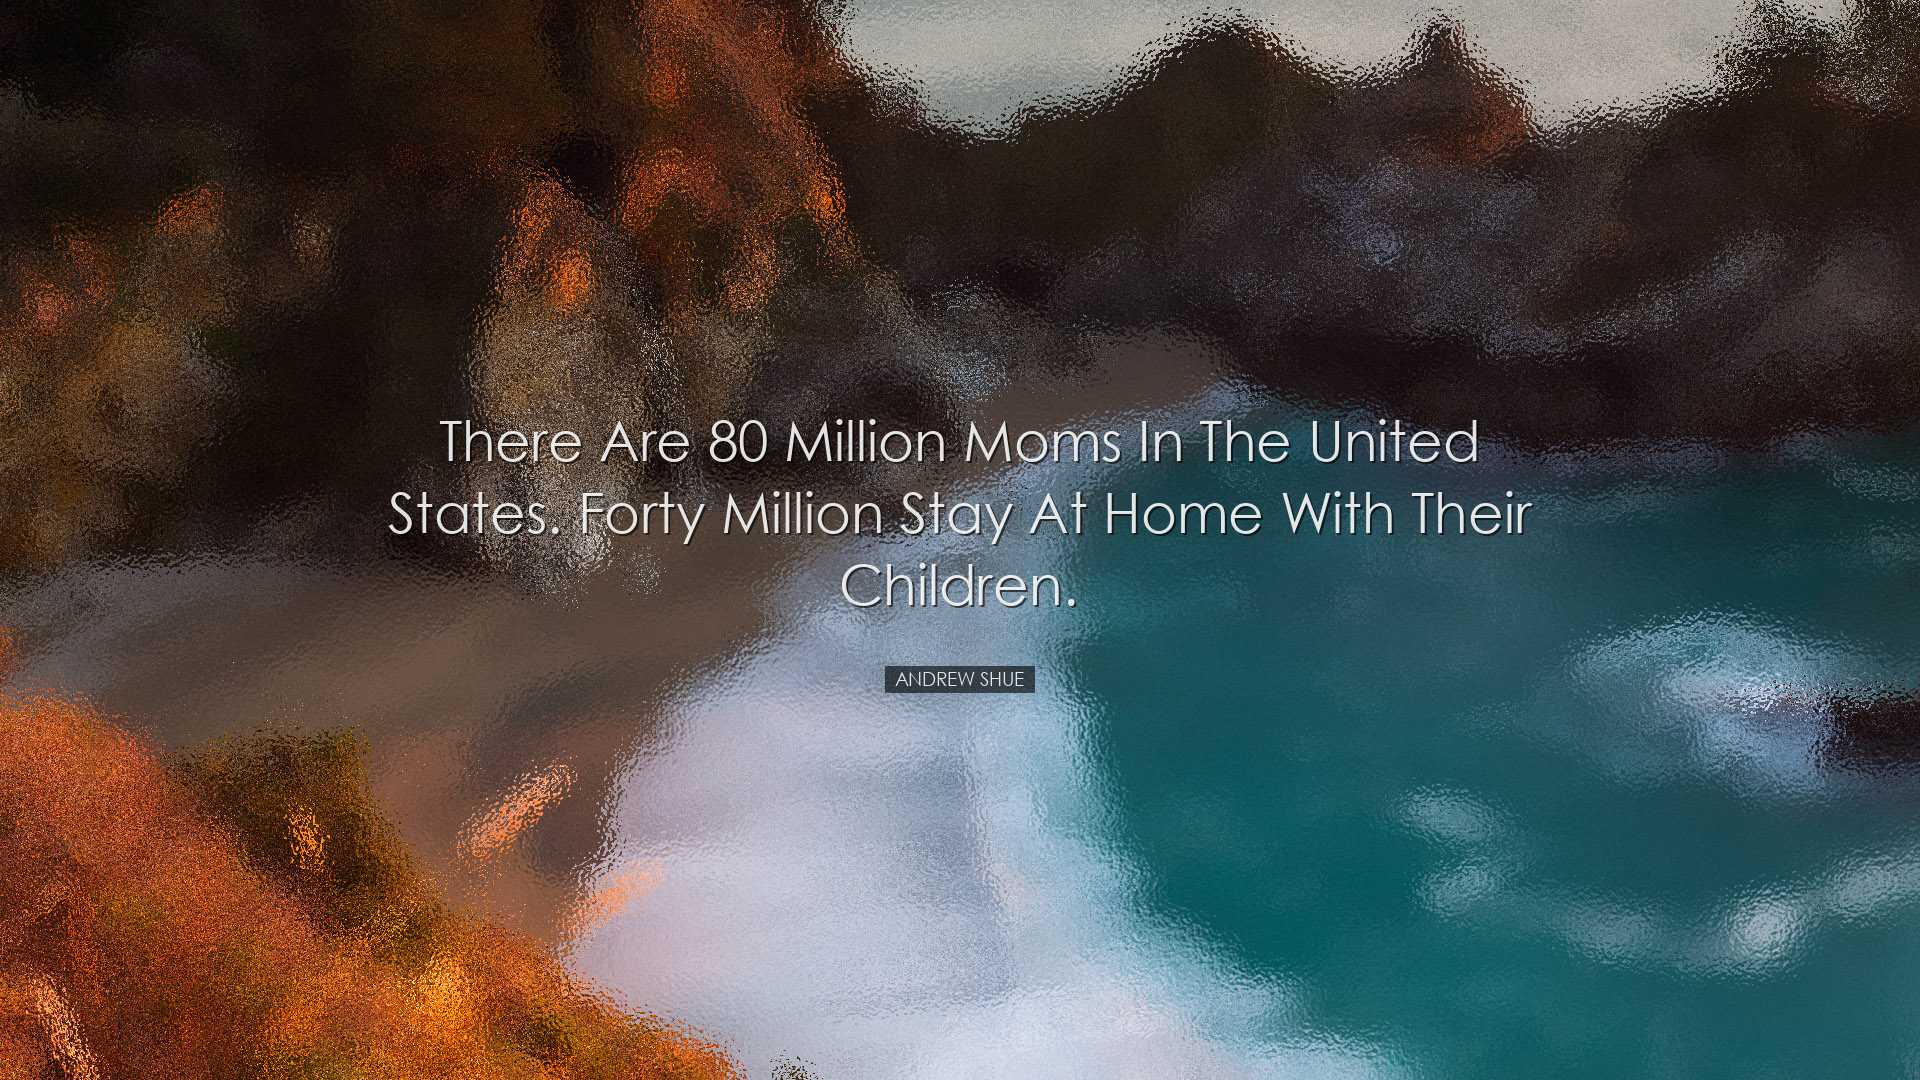 There are 80 million moms in the United States. Forty million stay